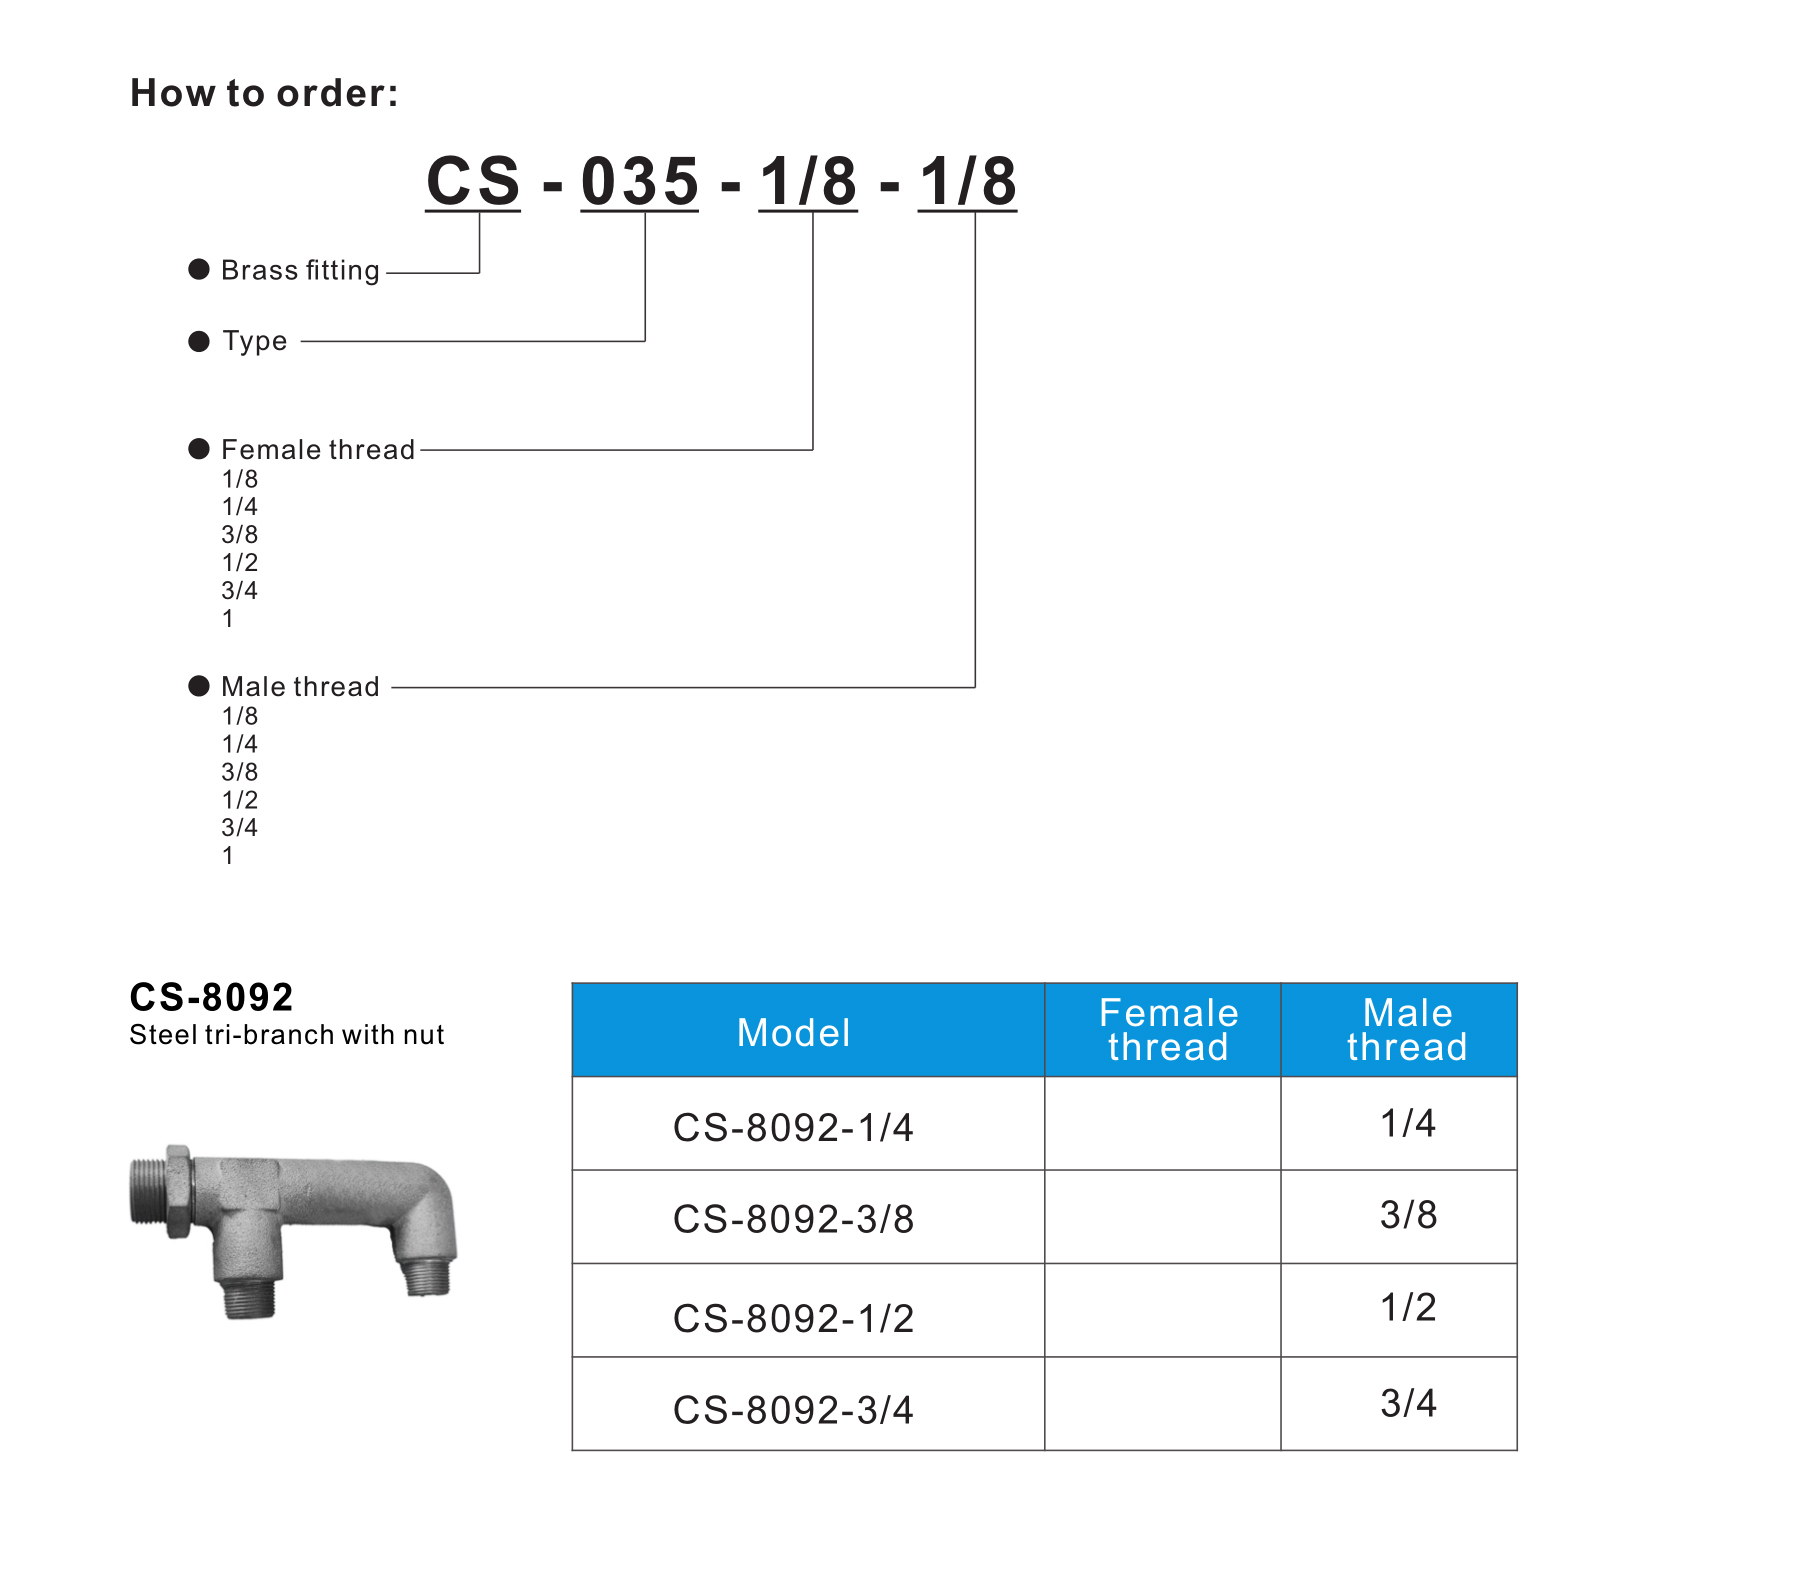 CS-8092 Steel tri-branch with nut